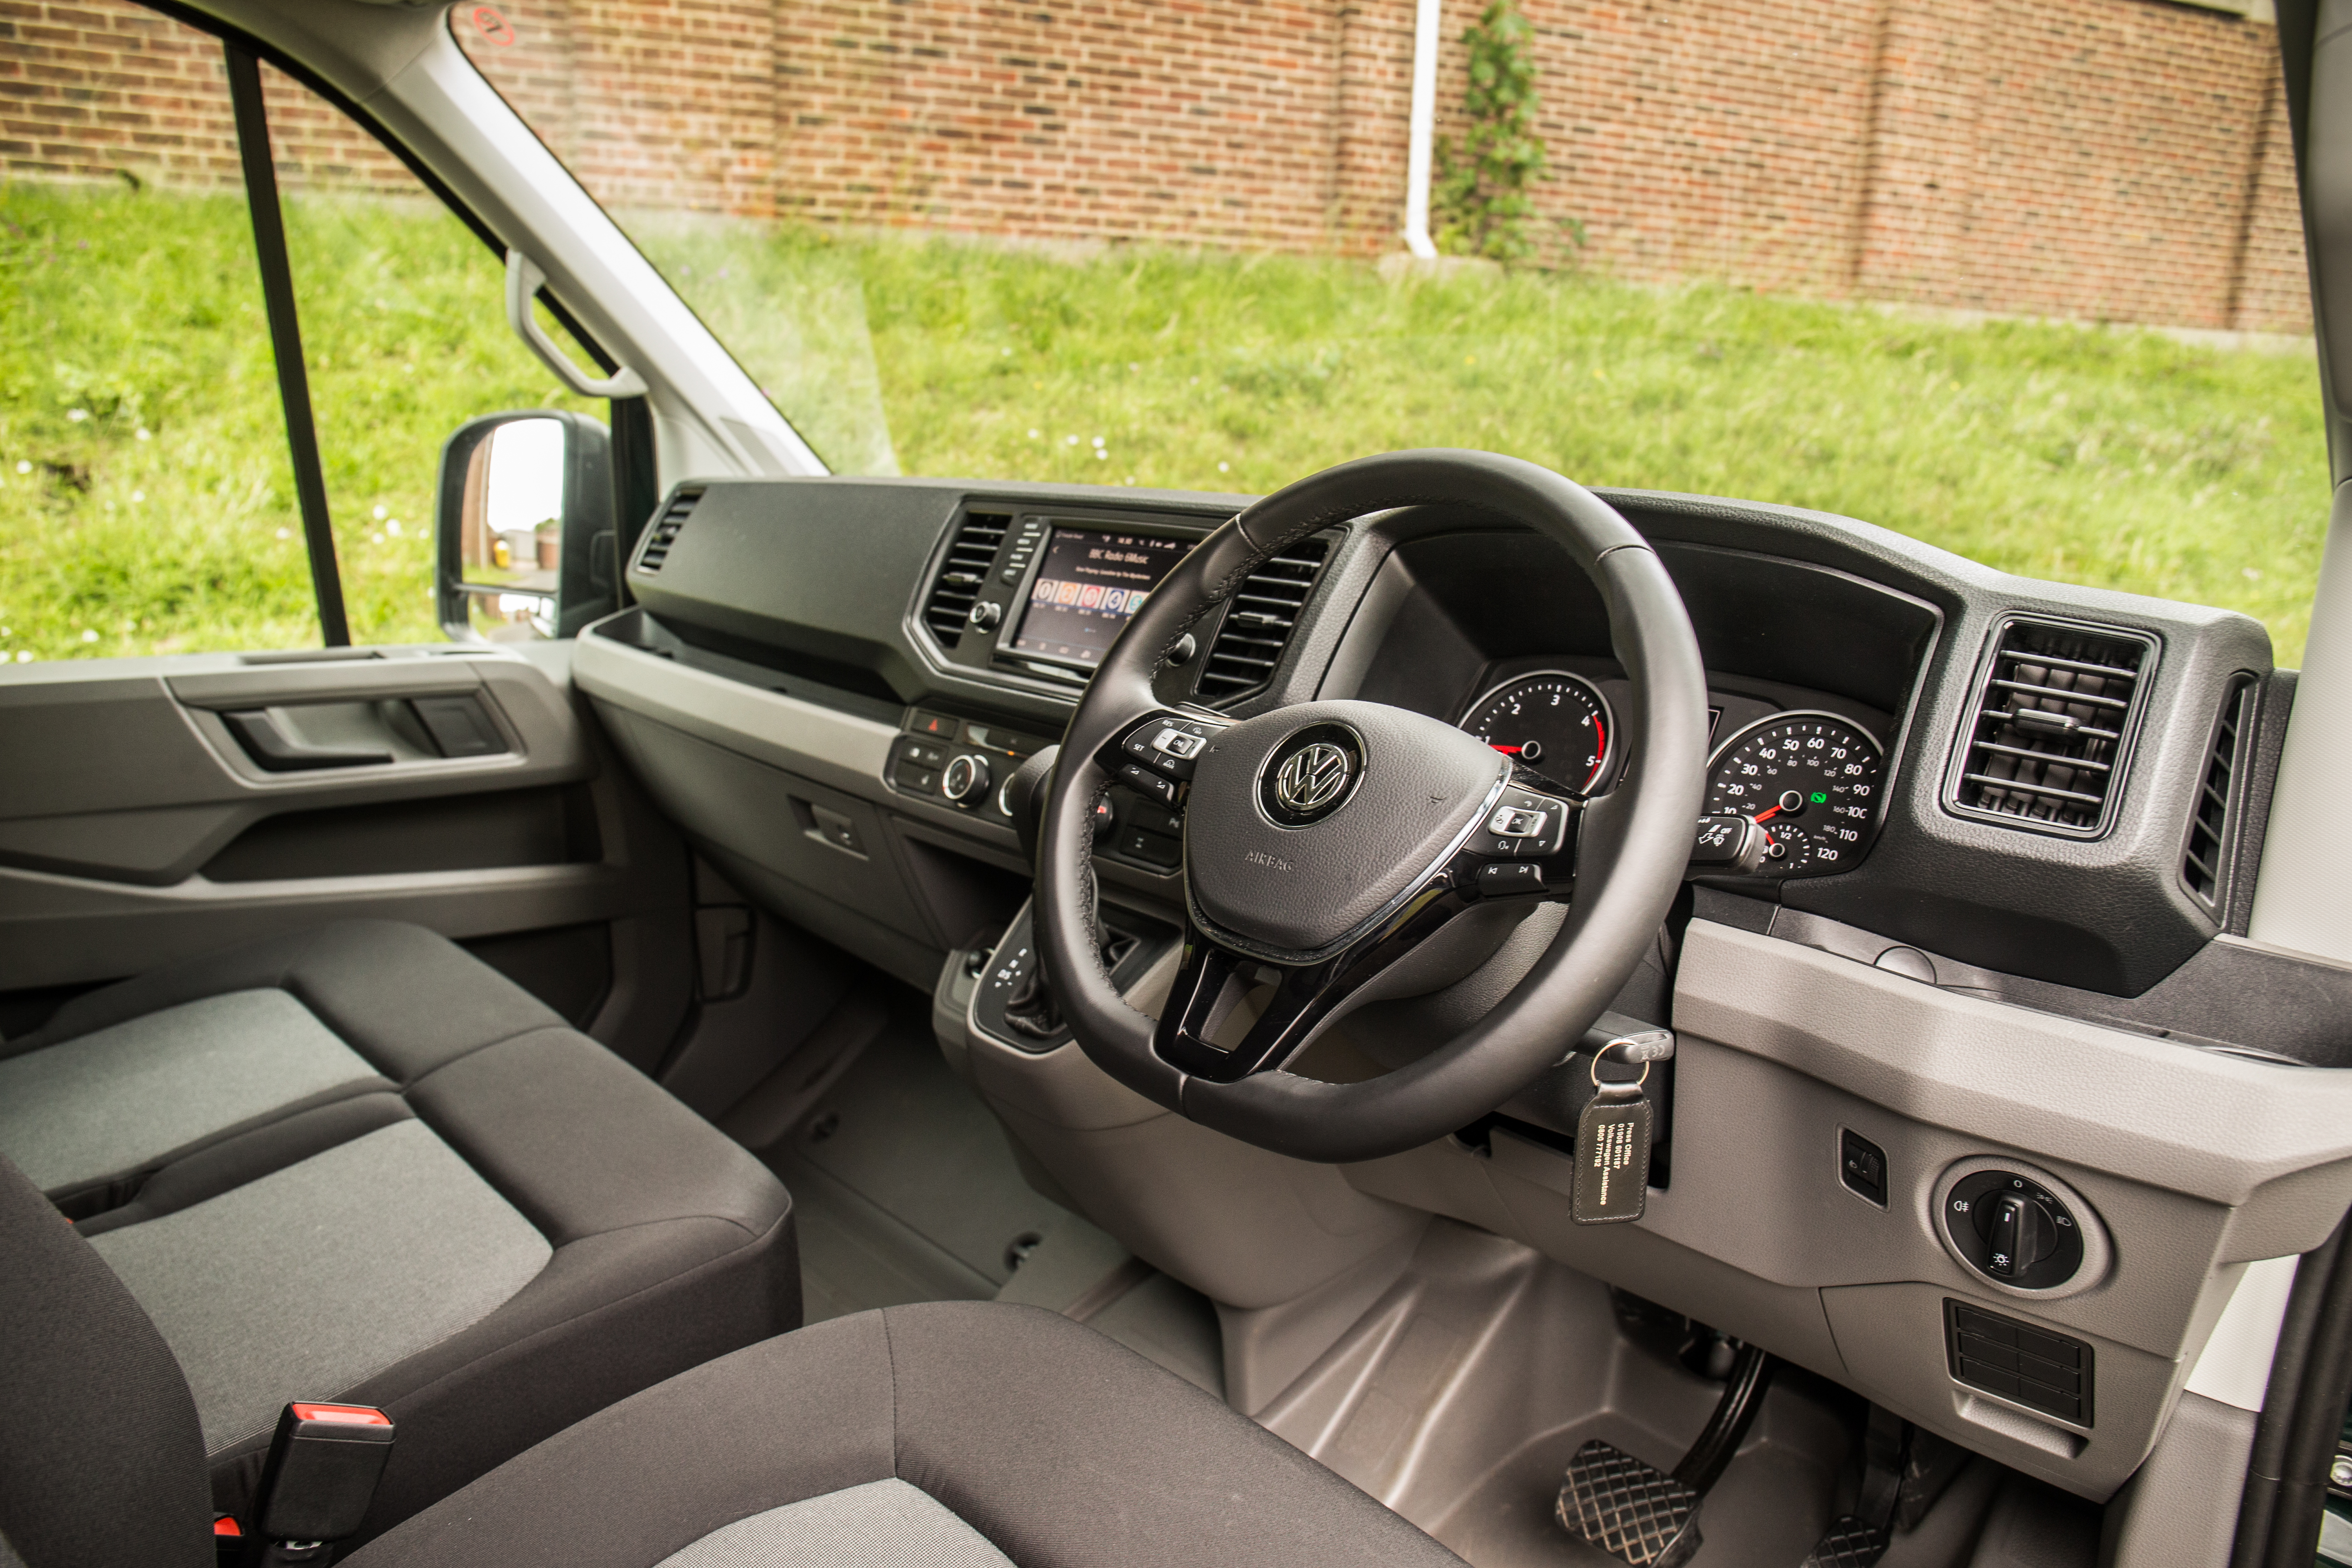 The Crafter's interior will feel familiar to owners of current Volkswagen cars